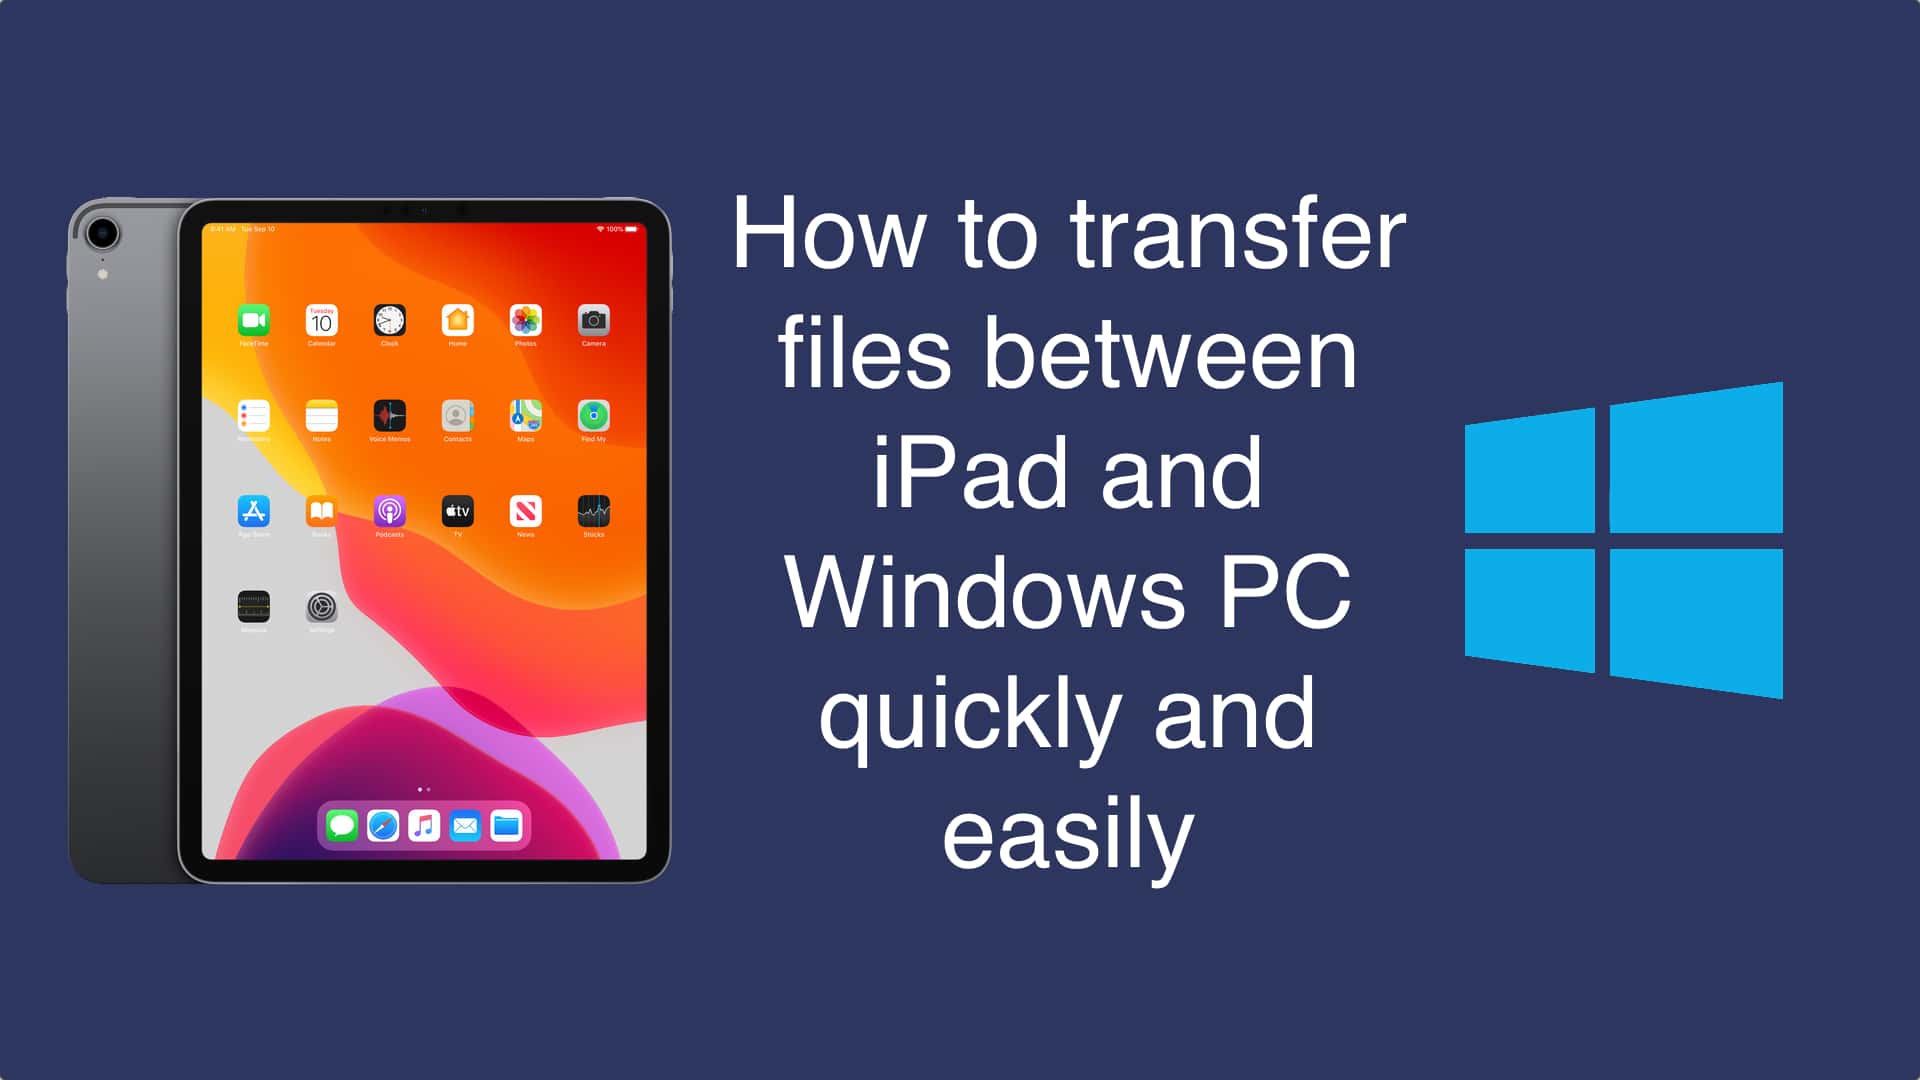 How to Transfer Files Between iPad and Windows PC Quickly and Easily